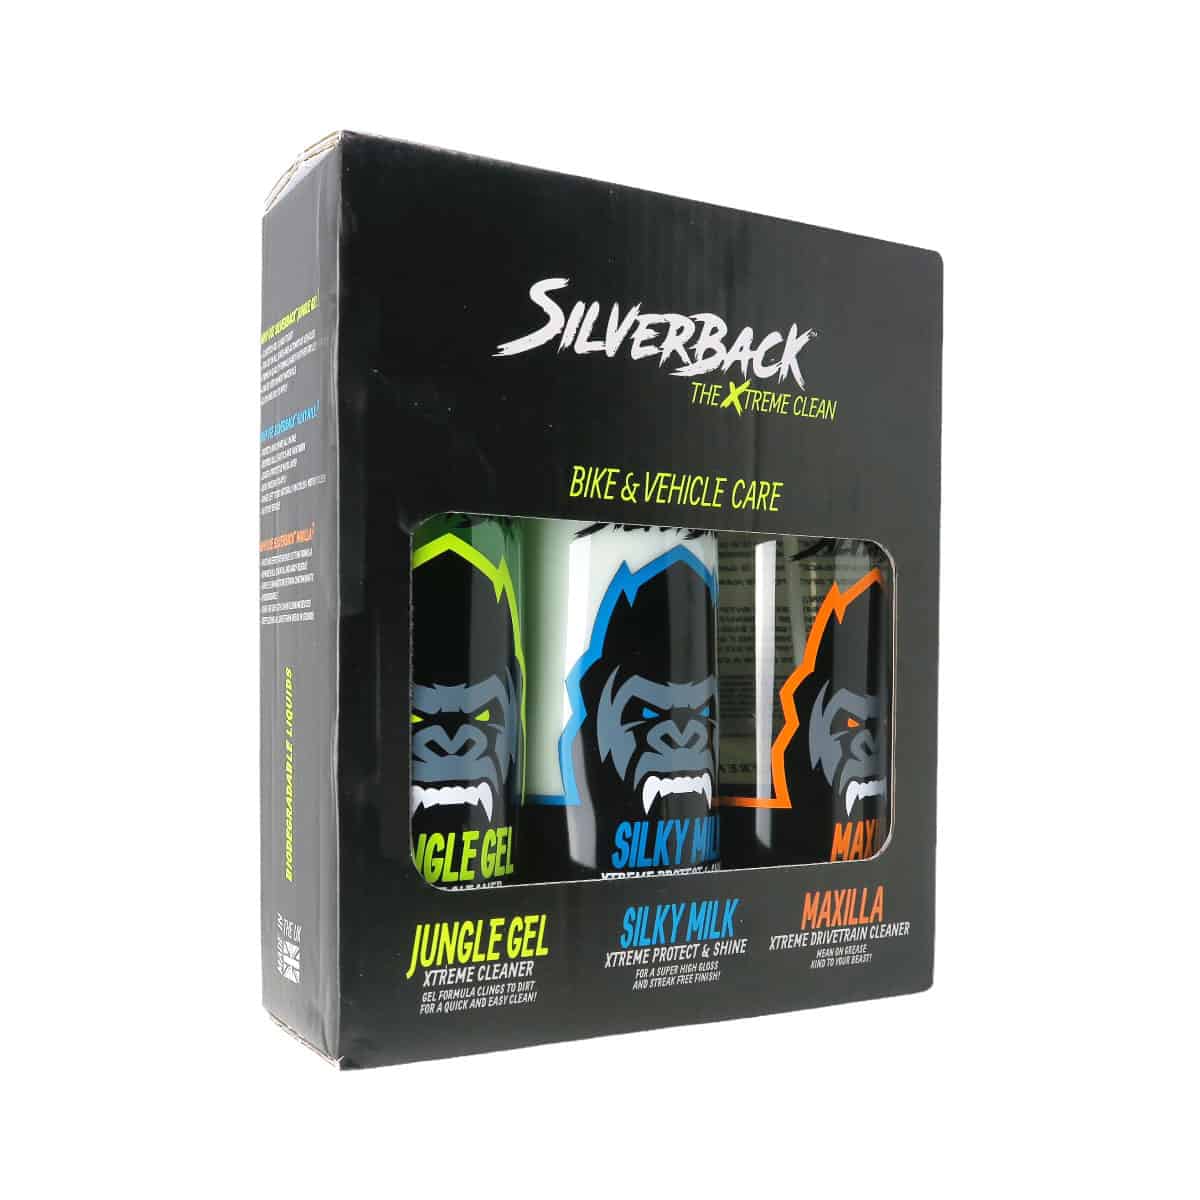 Silverback Motorcycle Cleaning Gift Box: The 3 essential treatments for your motorcycle & dirtbike 2